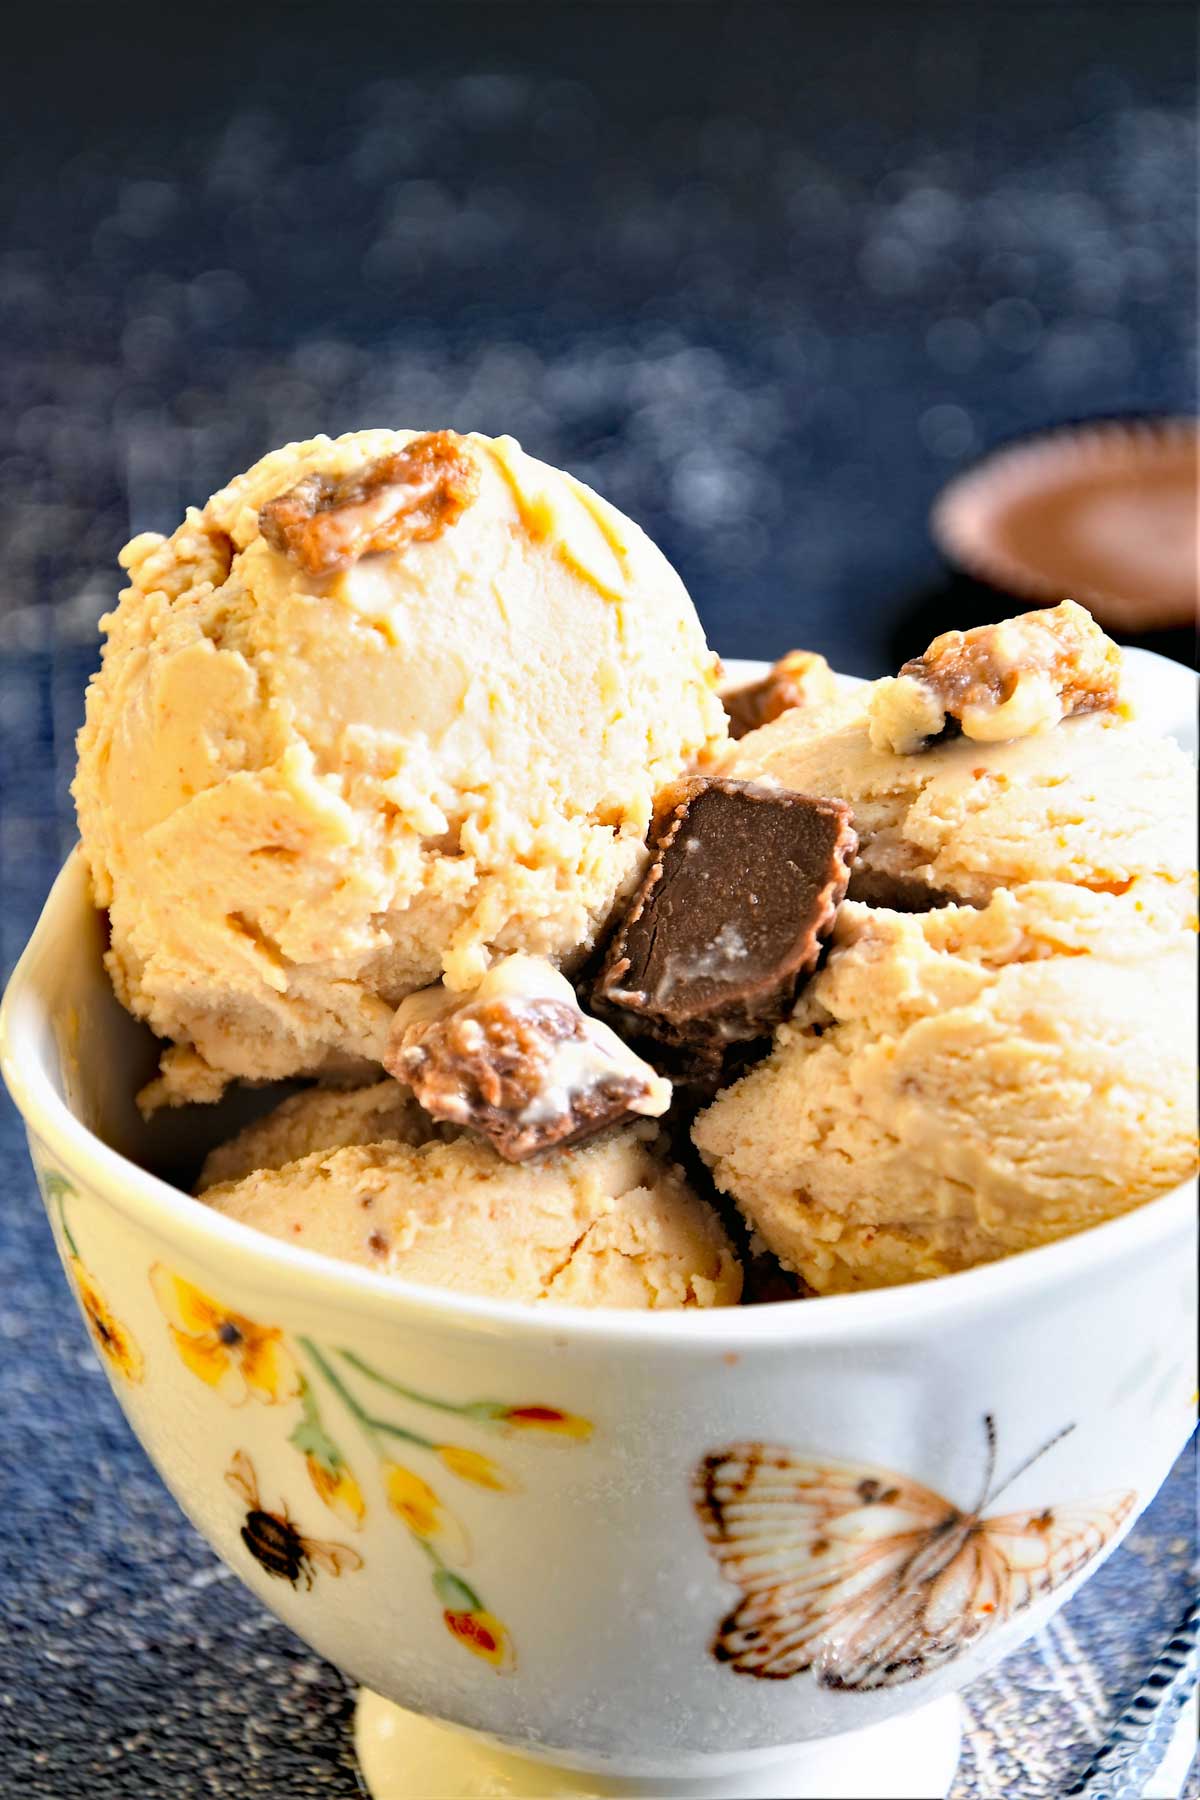 Peanut butter ice cream scoops served in a bowl with Reese's topping